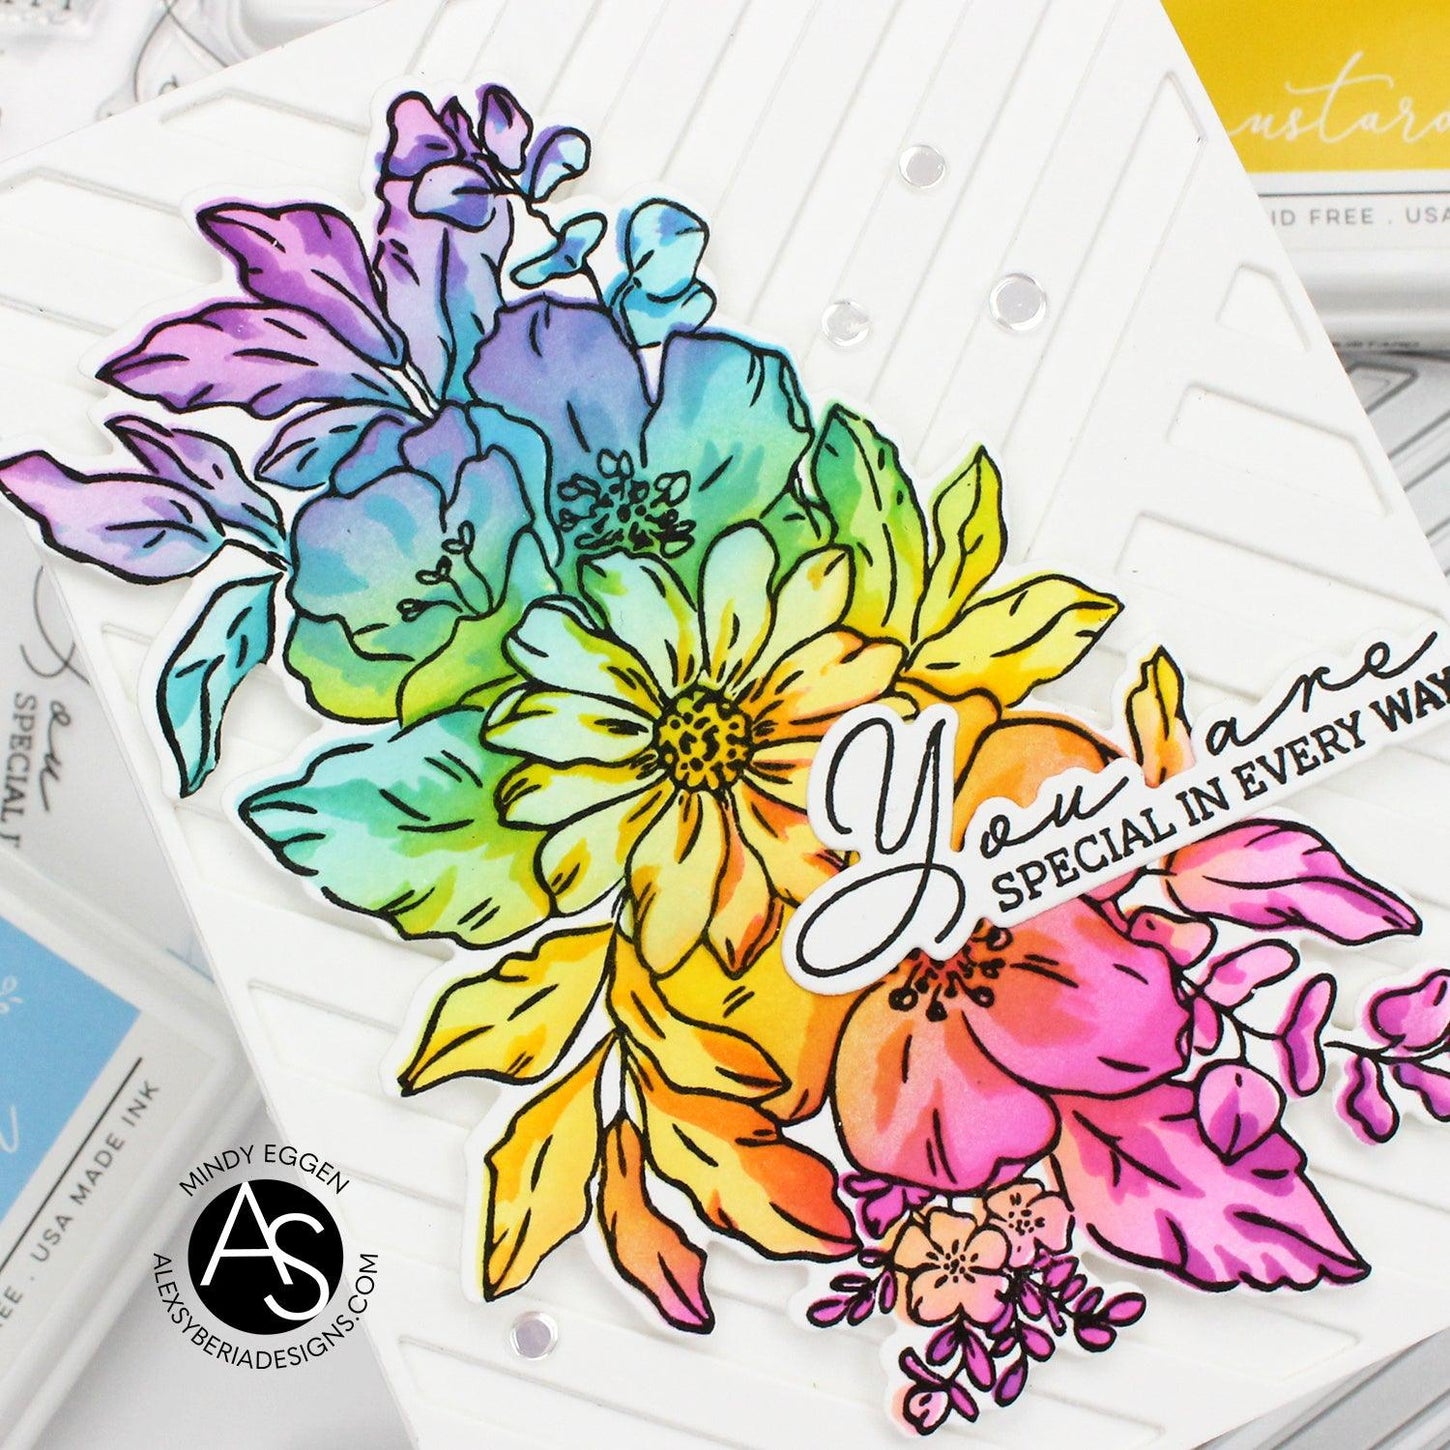 life-is-good-stamp-set-alex-syberia-designs-bouquet-coloring-cardmaking-tutorial-floral-card-famous-cardmaking-brands-copic-coloring-handmadecards-stencils-embossing-die-cover-stripes